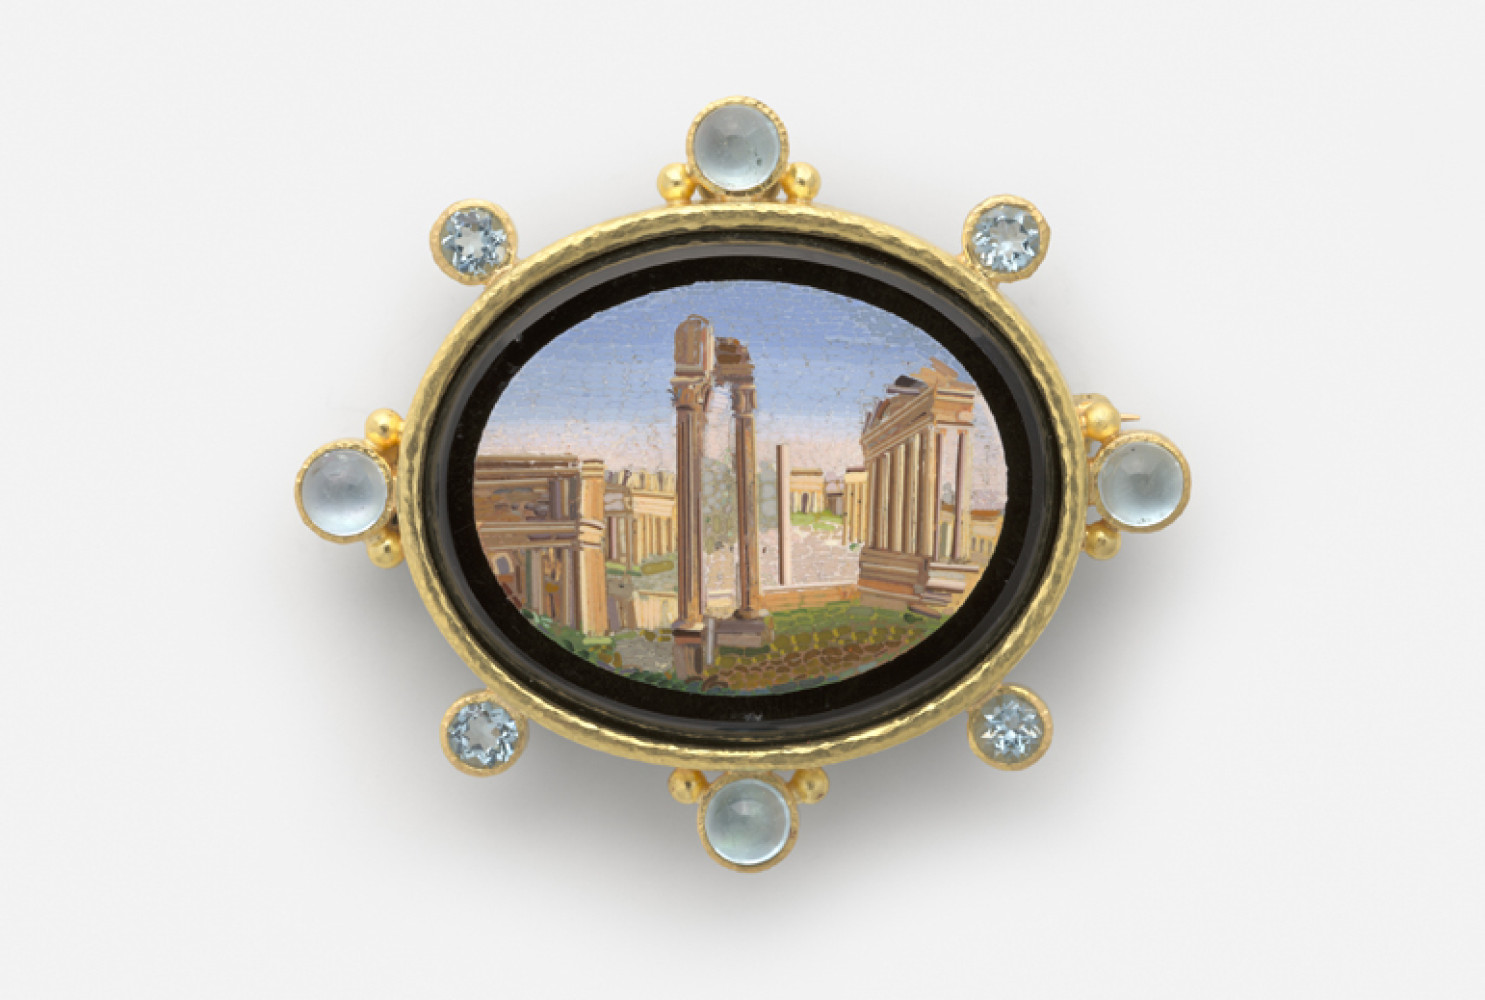 Roman Forum, Rome, 19th century; Micromosaic set in gold as a brooch, with alternating 6-mm cabochon aquamarines with side gold dots and 5-mm faceted aquamarines around bezel, 54 x 62 mm. Collection of Elizabeth Locke; Photo: Travis Fullerton; © Virginia Museum of Fine Arts
